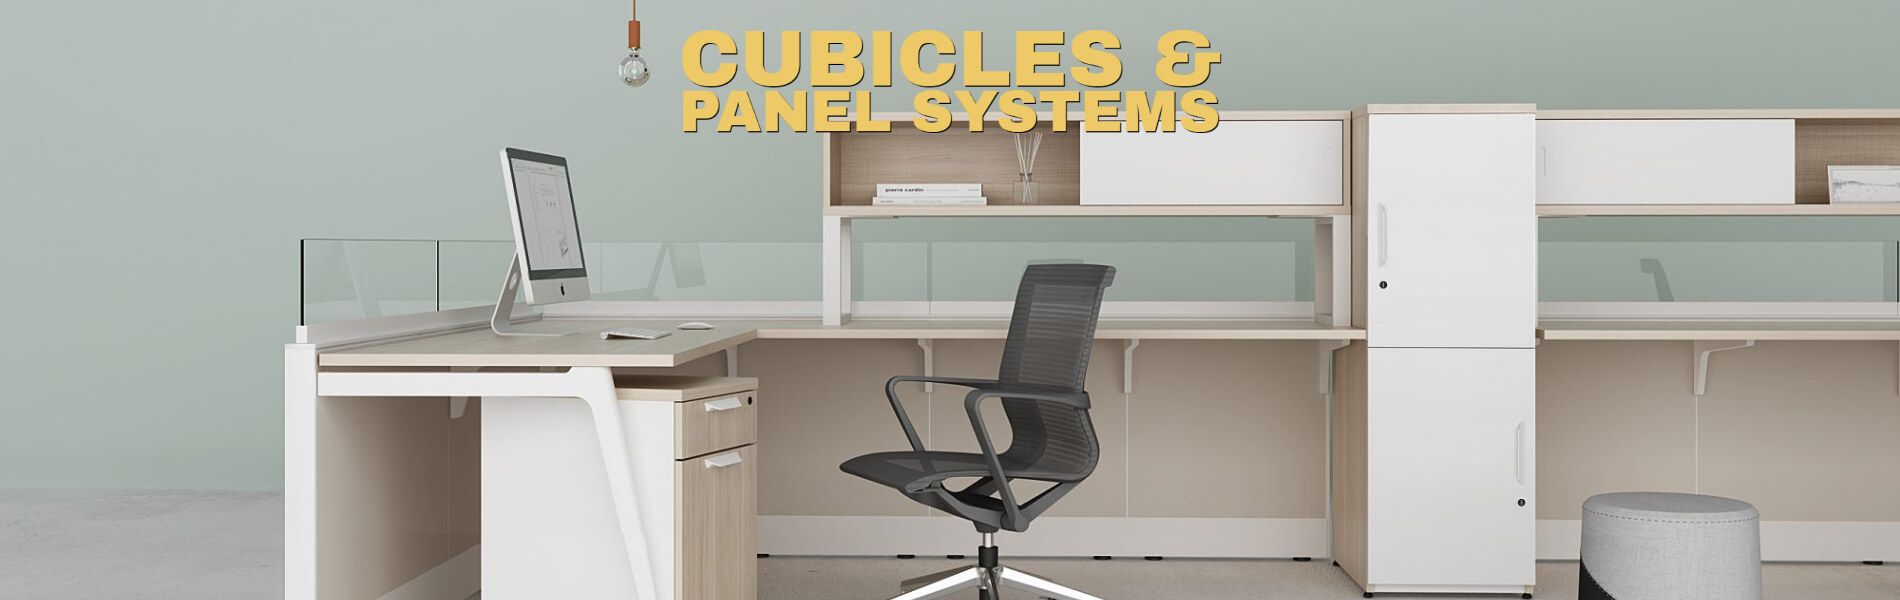 Check out new cubicles and panels offered by Office Tech